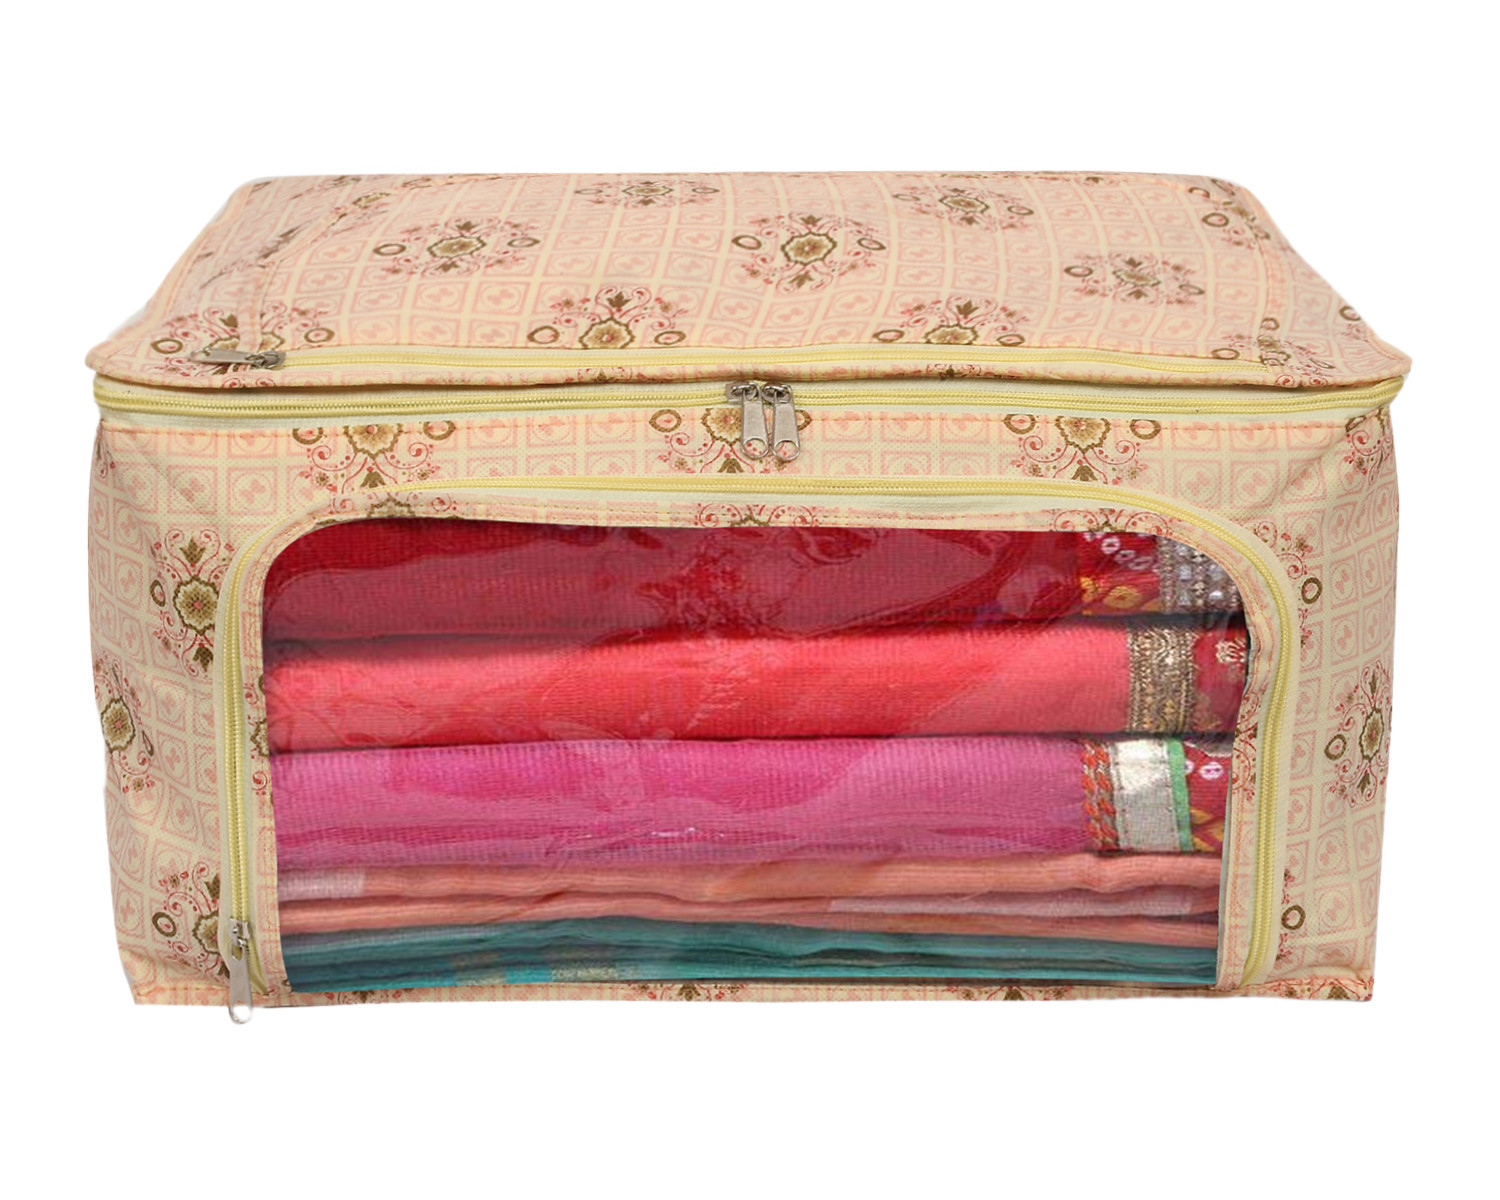 Kuber Industries Floral Print Non-Woven Saree cover With Large Pocket For Saree, Lehenga, Suit & Transparent Window (Pink) 54KM4164